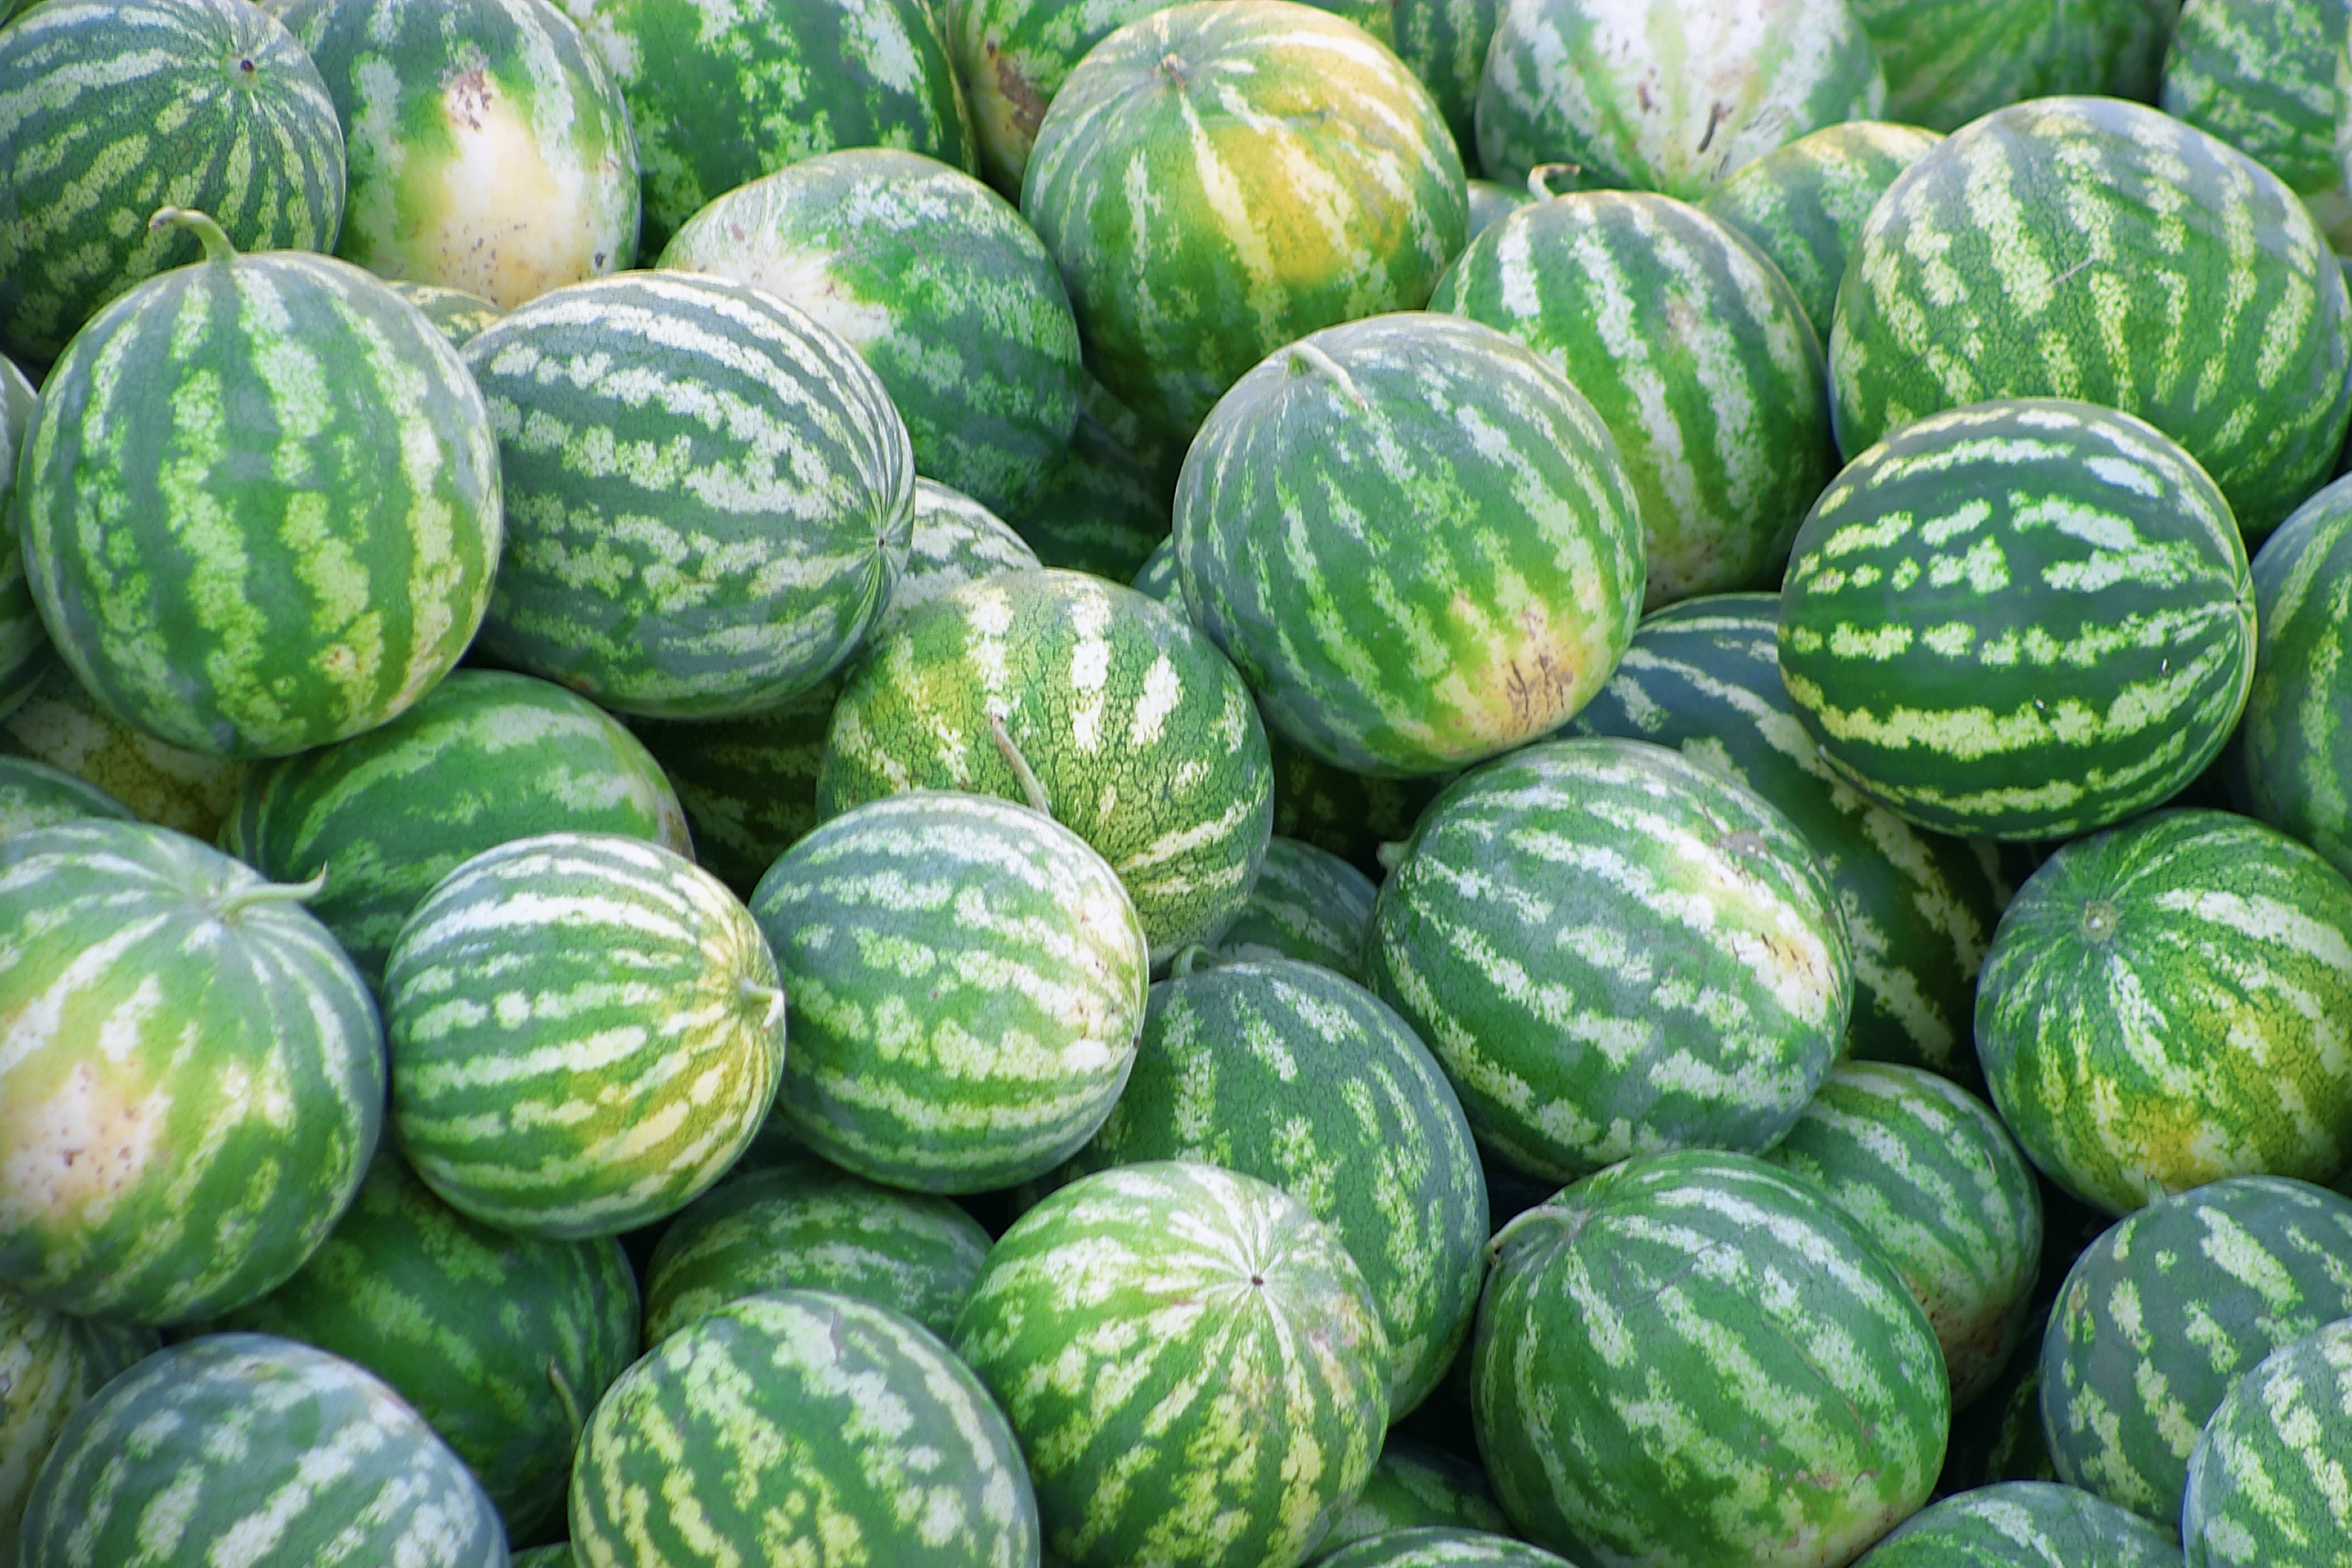 How Are Melons Good for You? | LIVESTRONG.COM